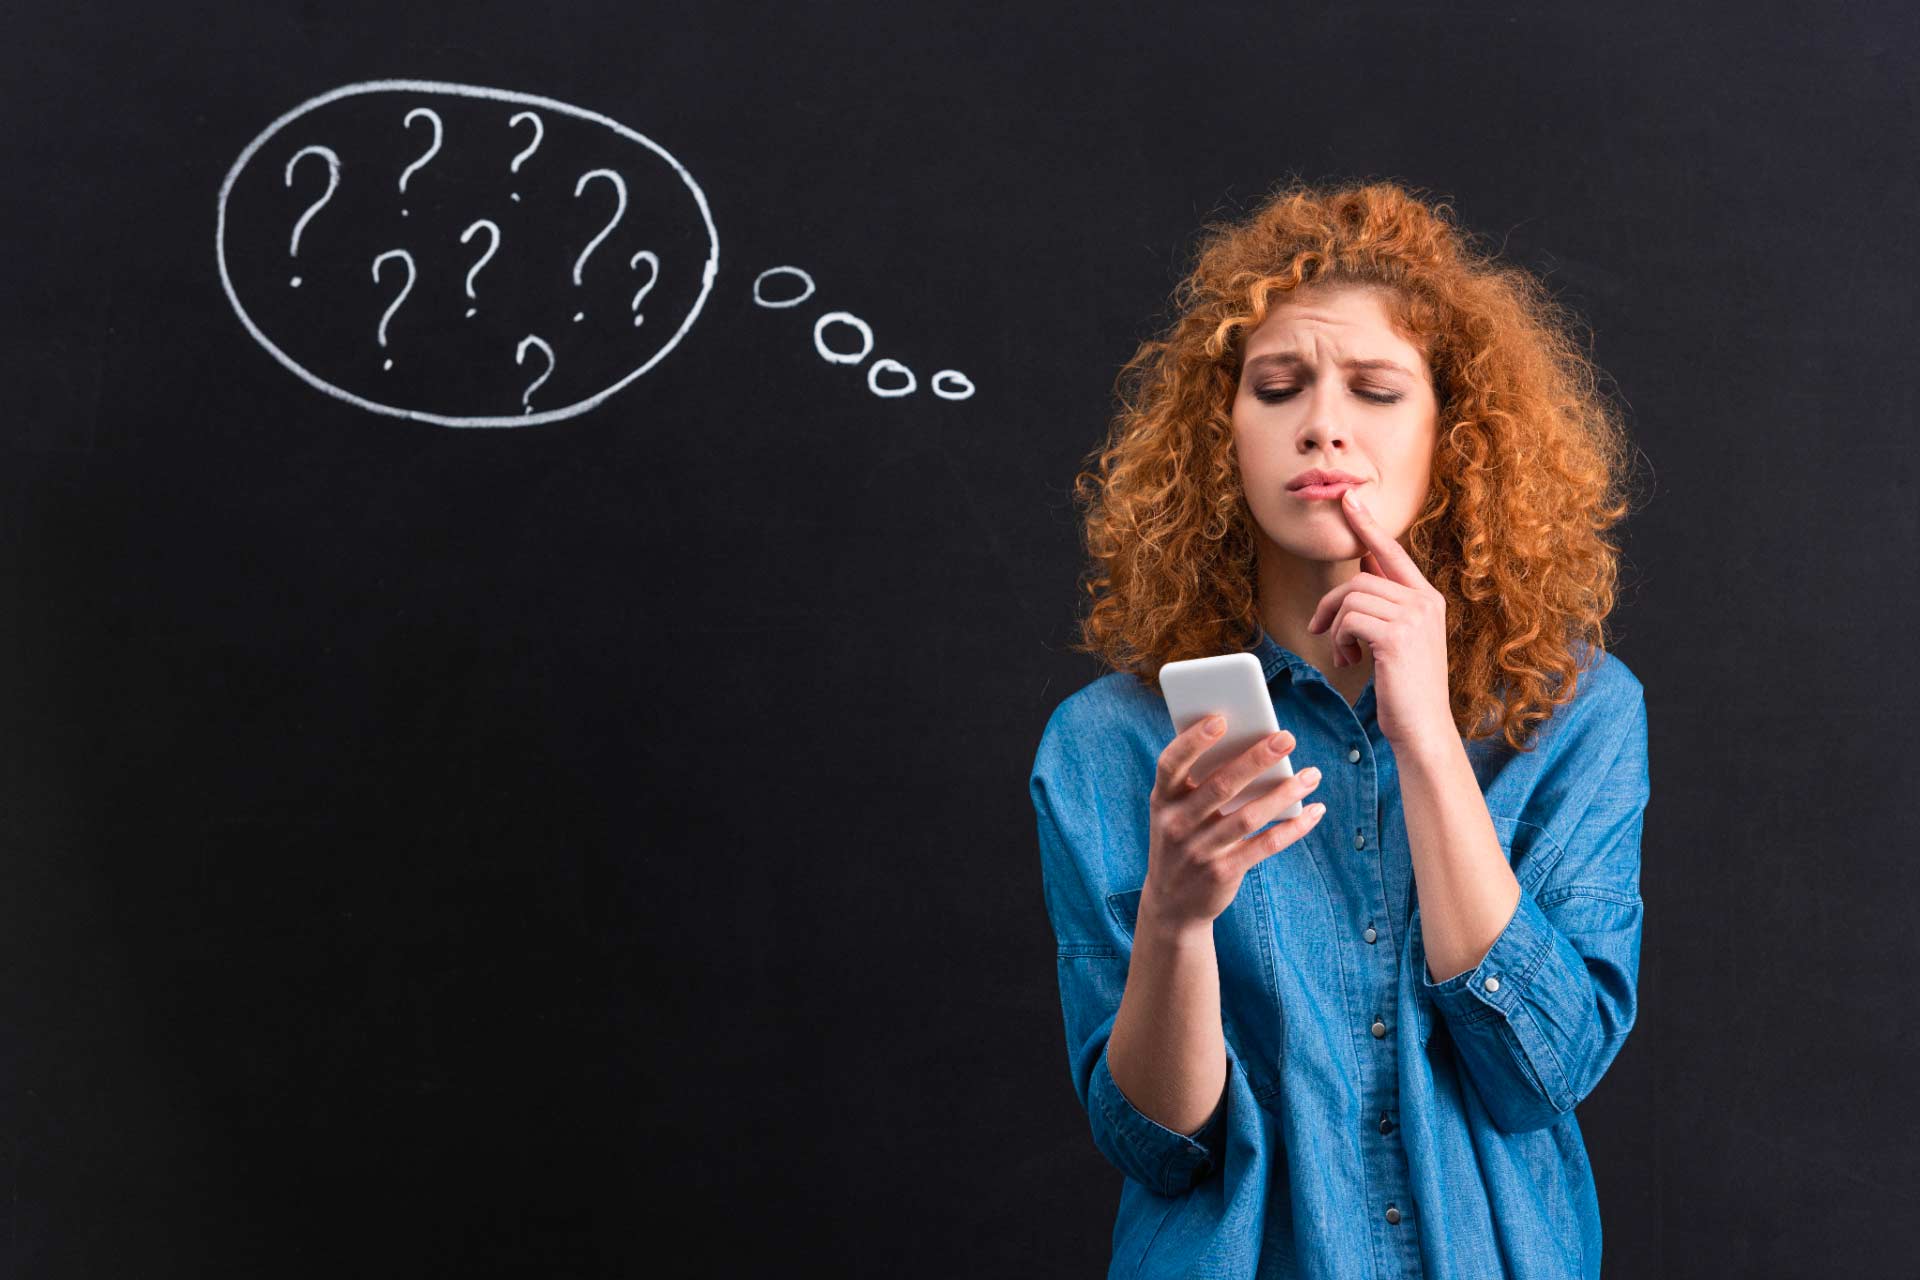 Woman holding phone looking at screen with questioning expression, with question mark thought bubble